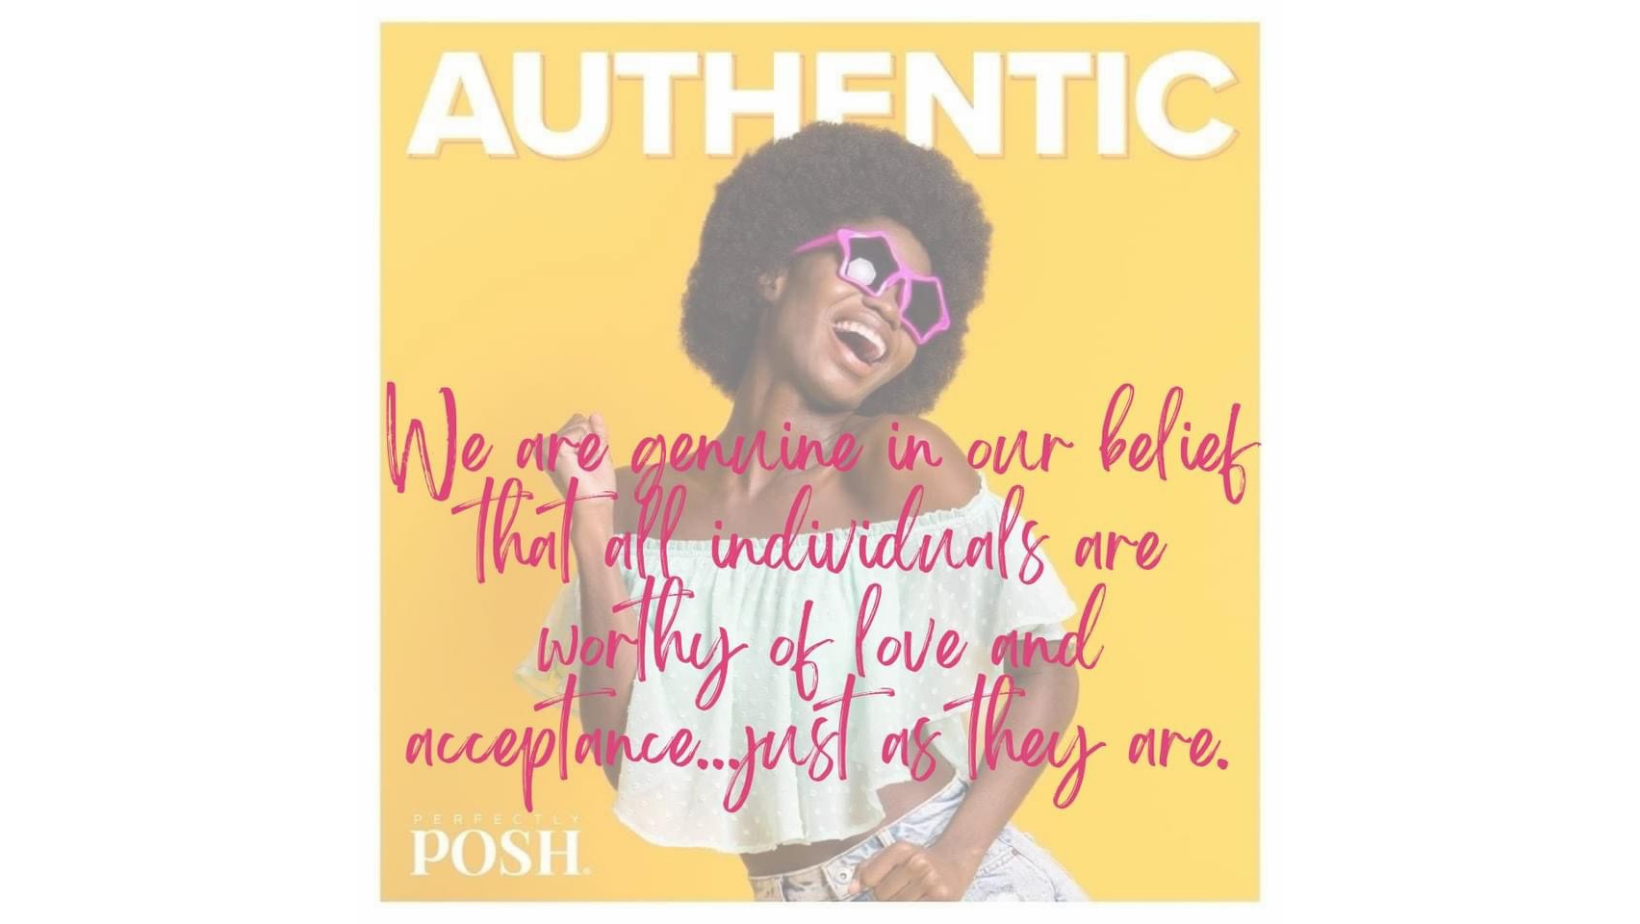 We are authentic